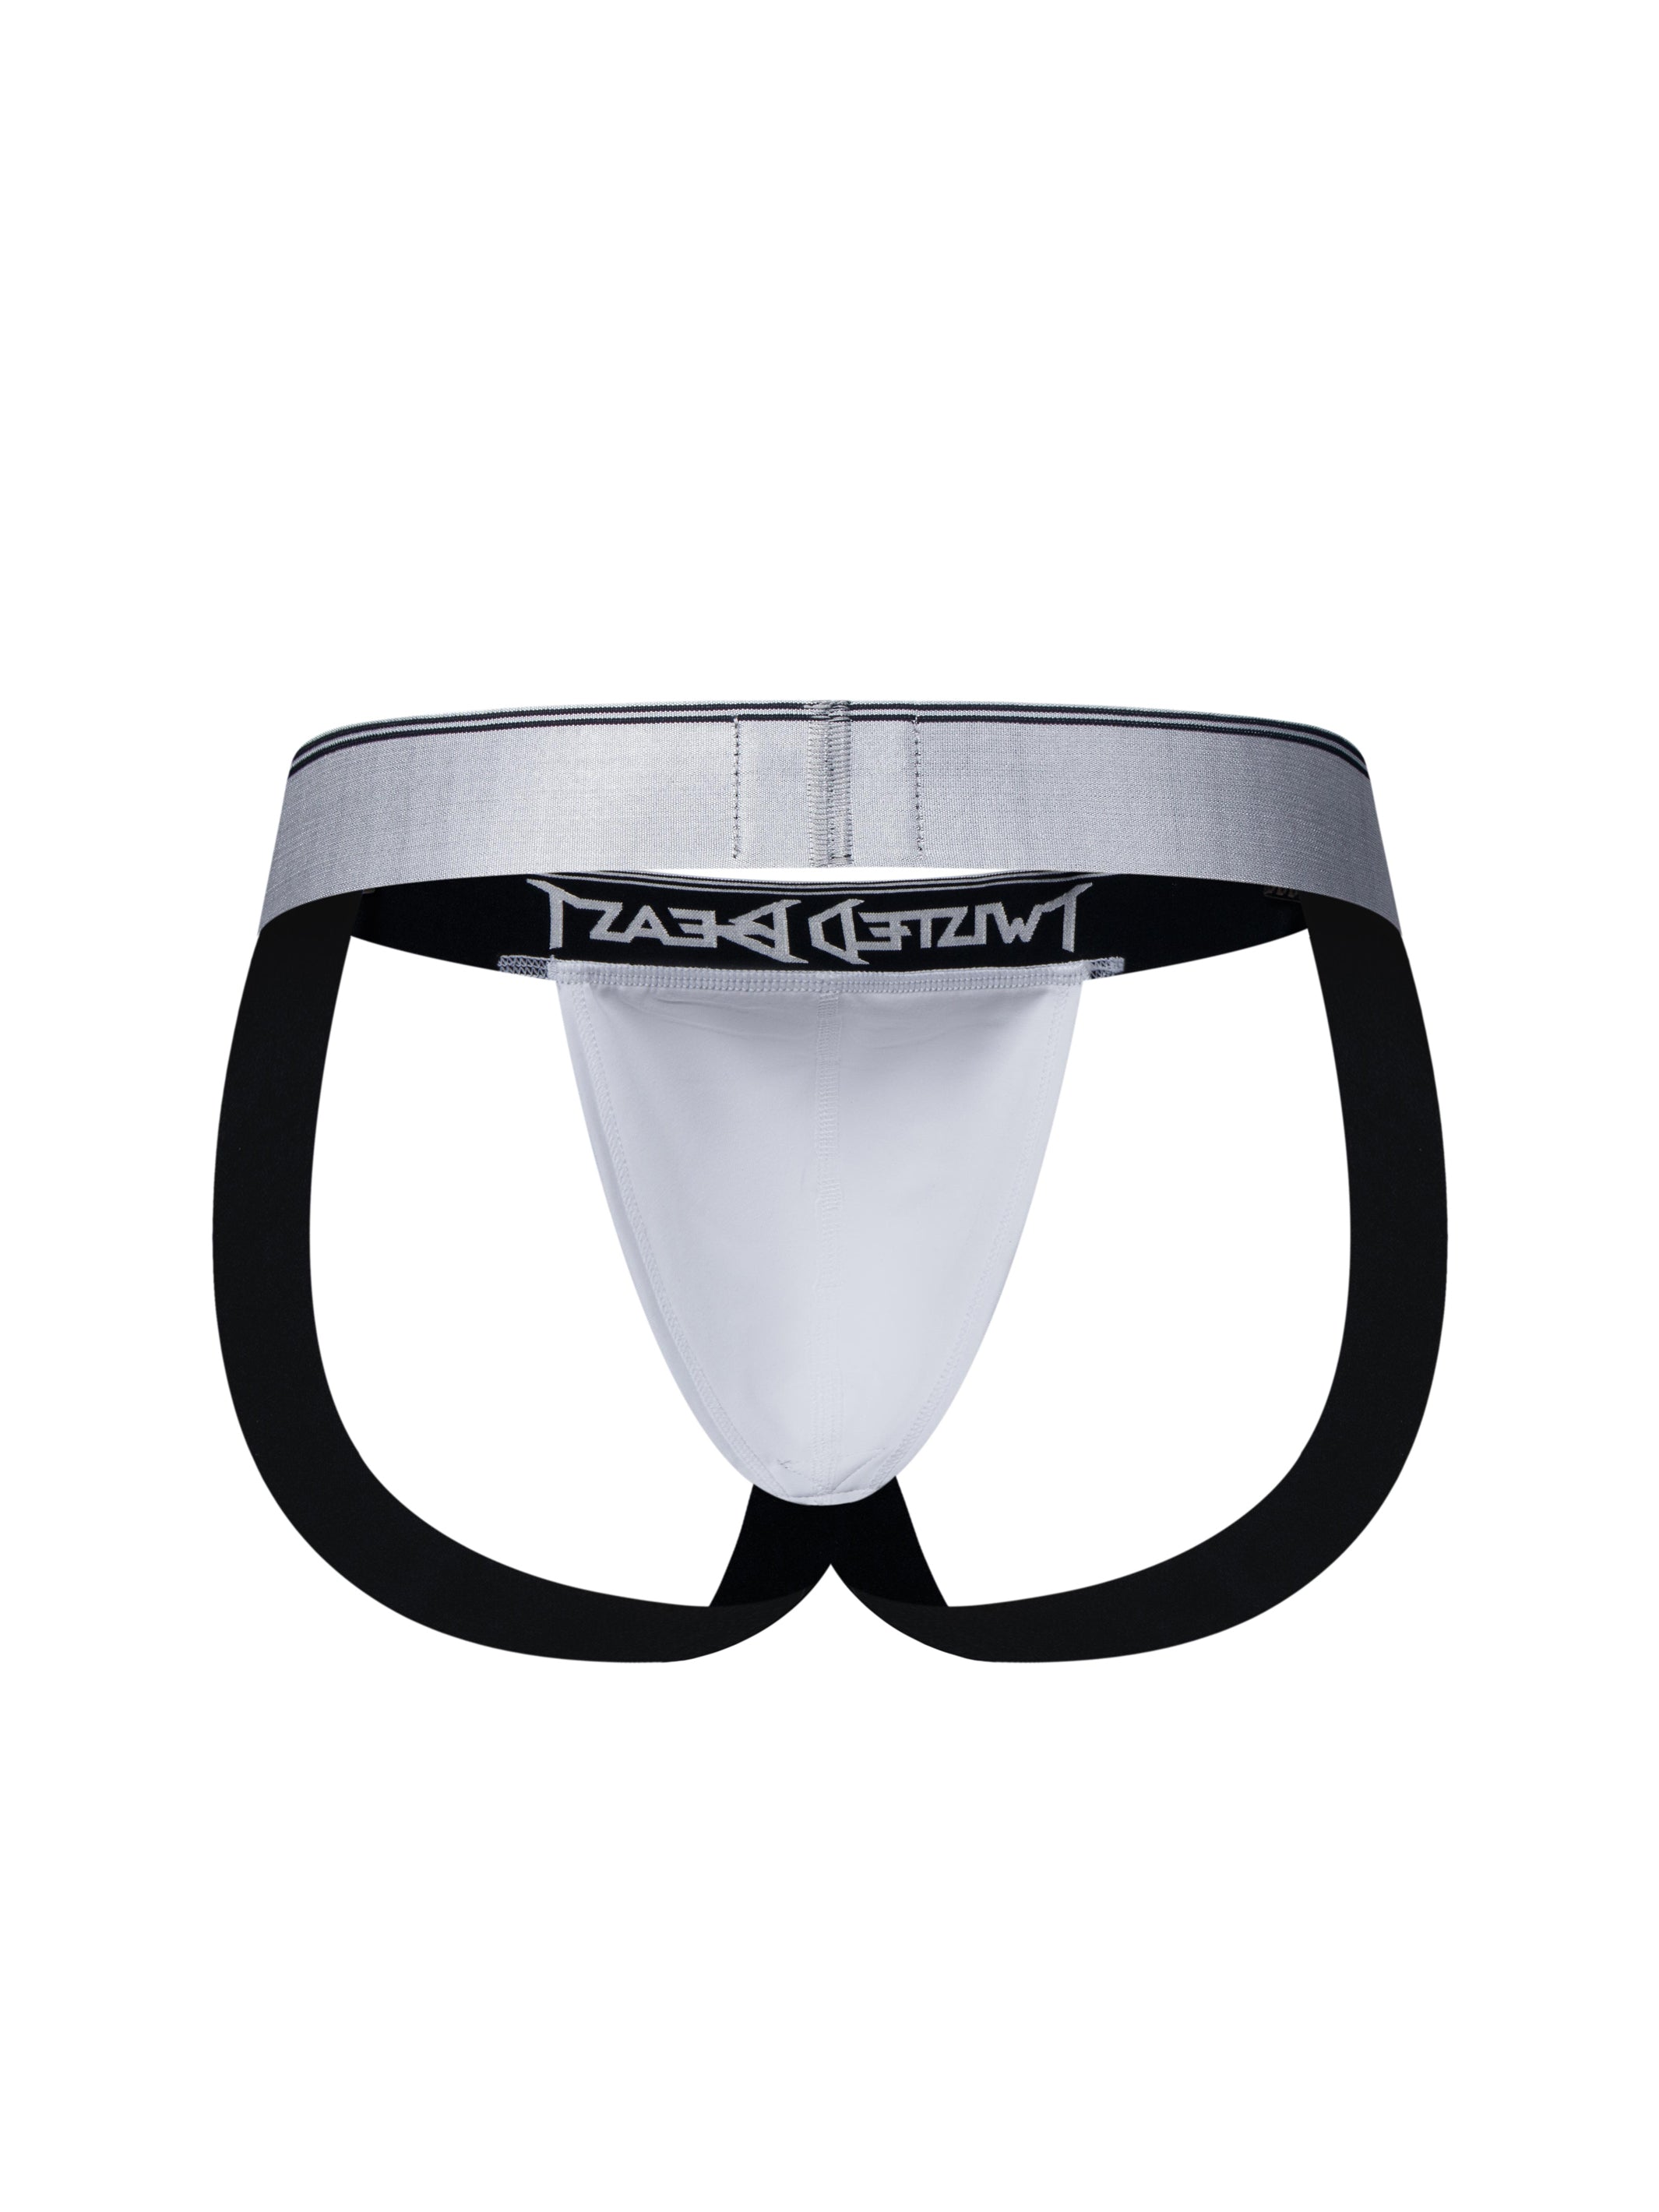 A product photo of the back of a Y2K Jock in white.